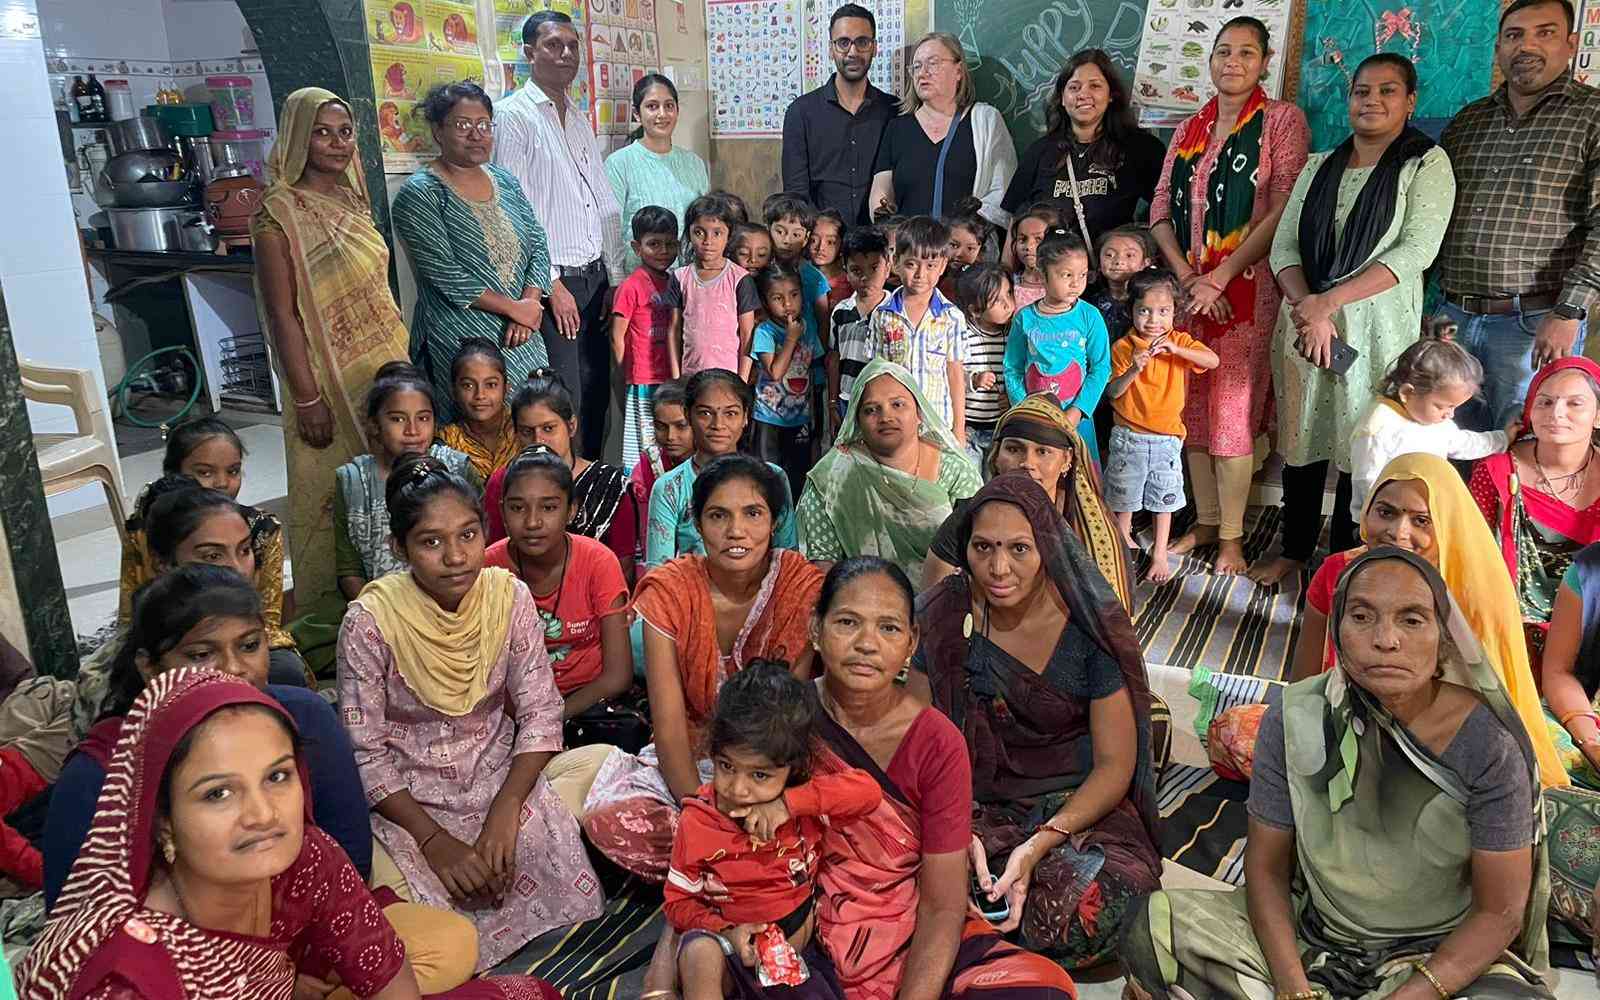 IKEA co-workers with women and children from the communities they work with. Photo courtesy of Saath team.